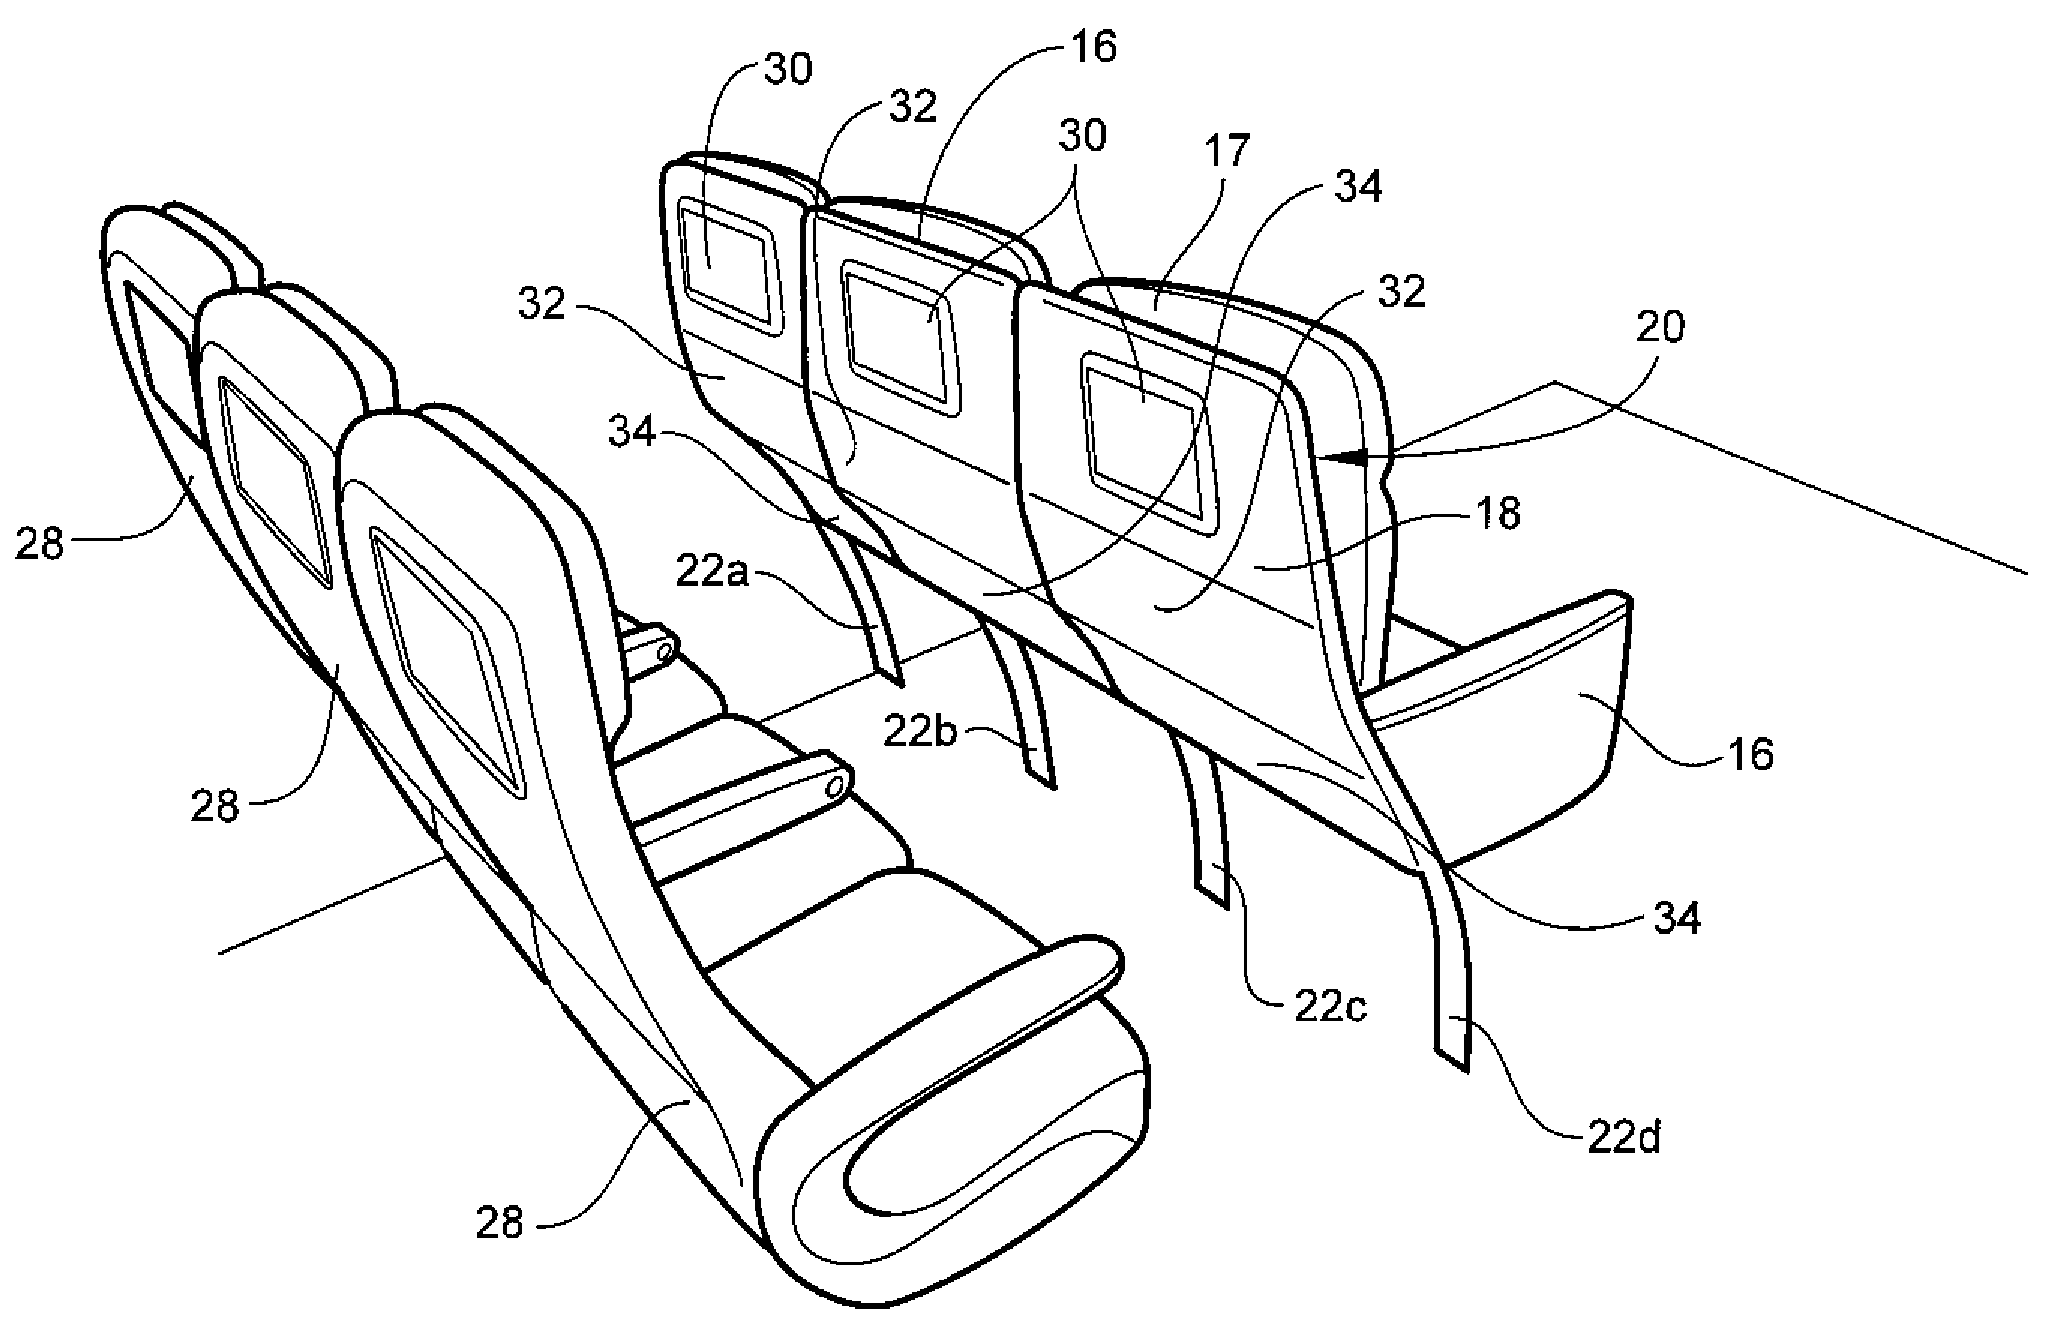 Class divider for aircraft cabin